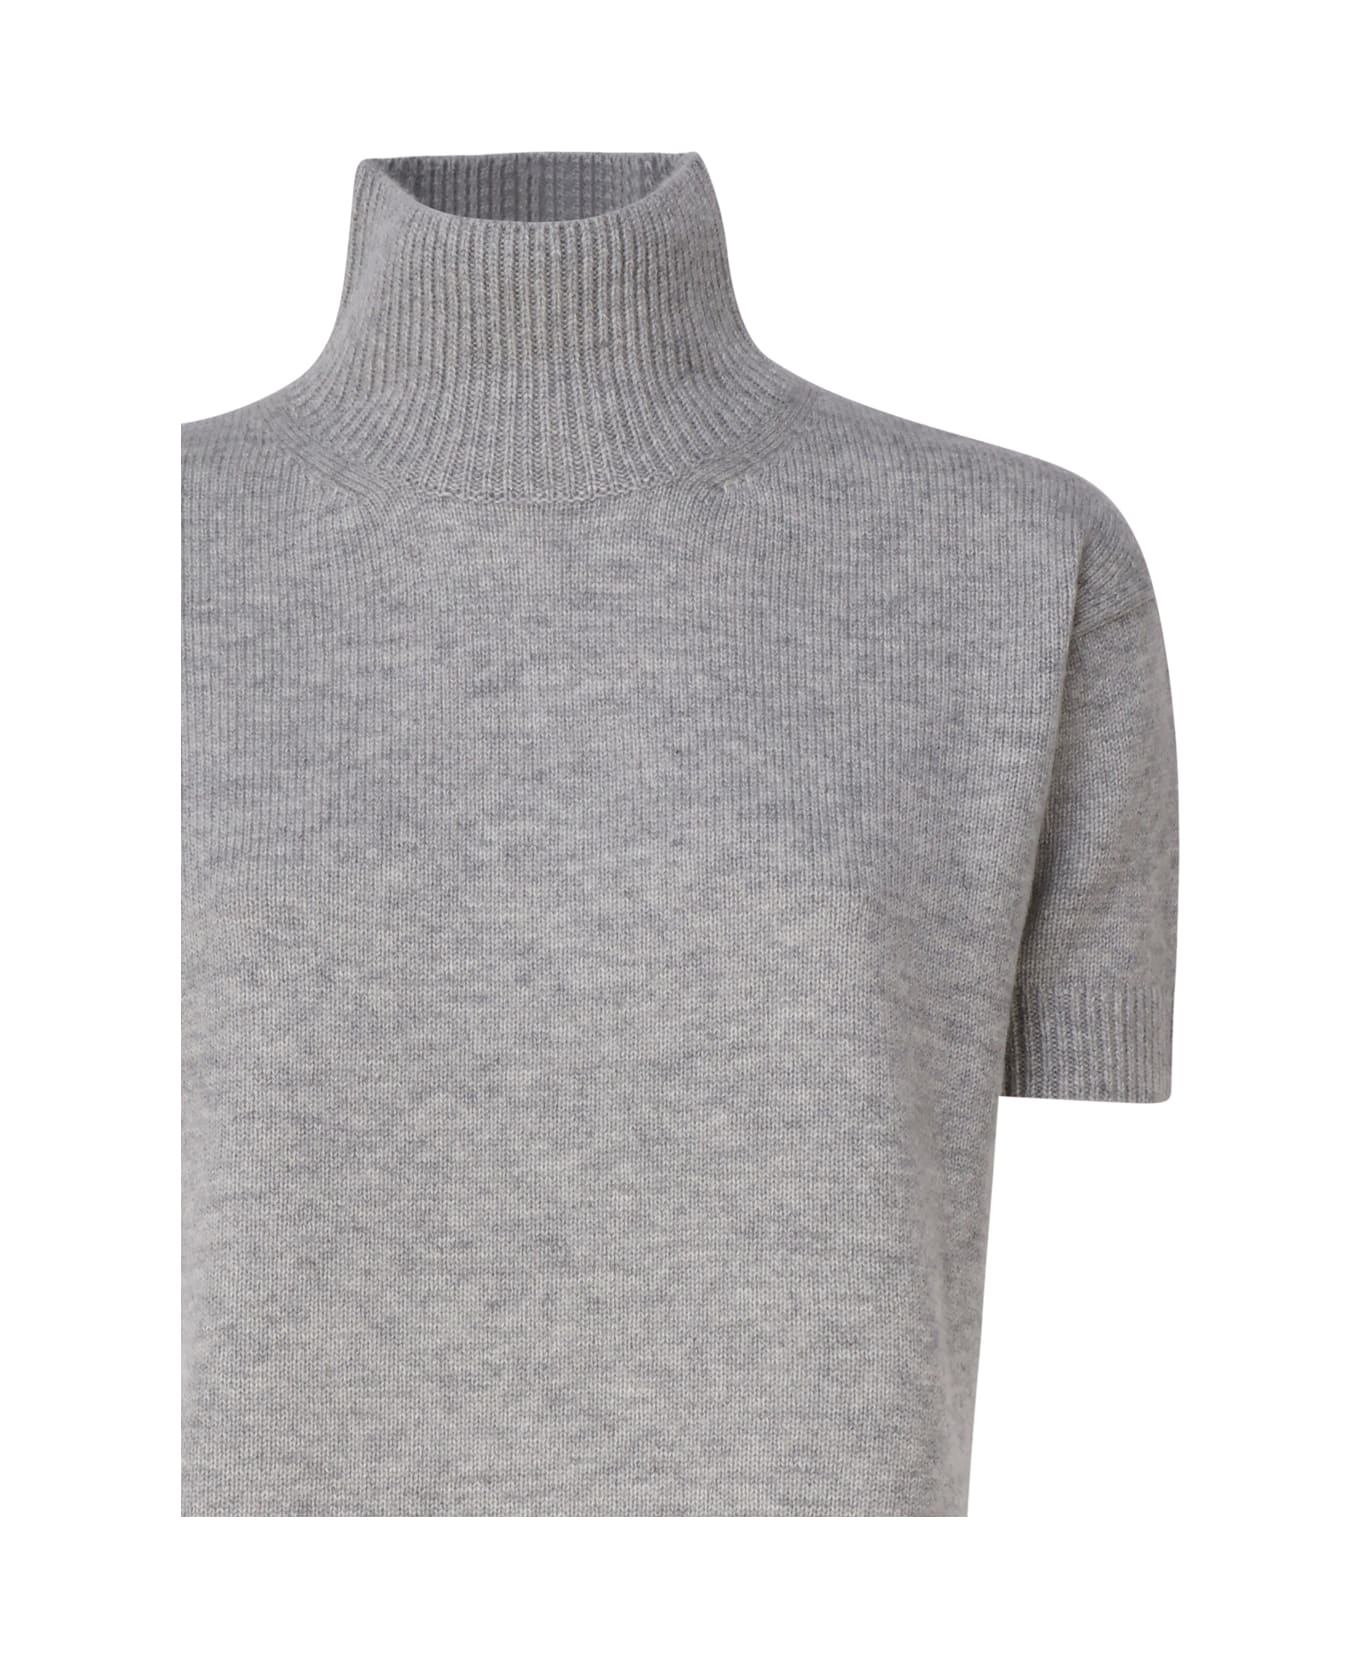 'S Max Mara Wool And Cashmere Turtleneck - Grey